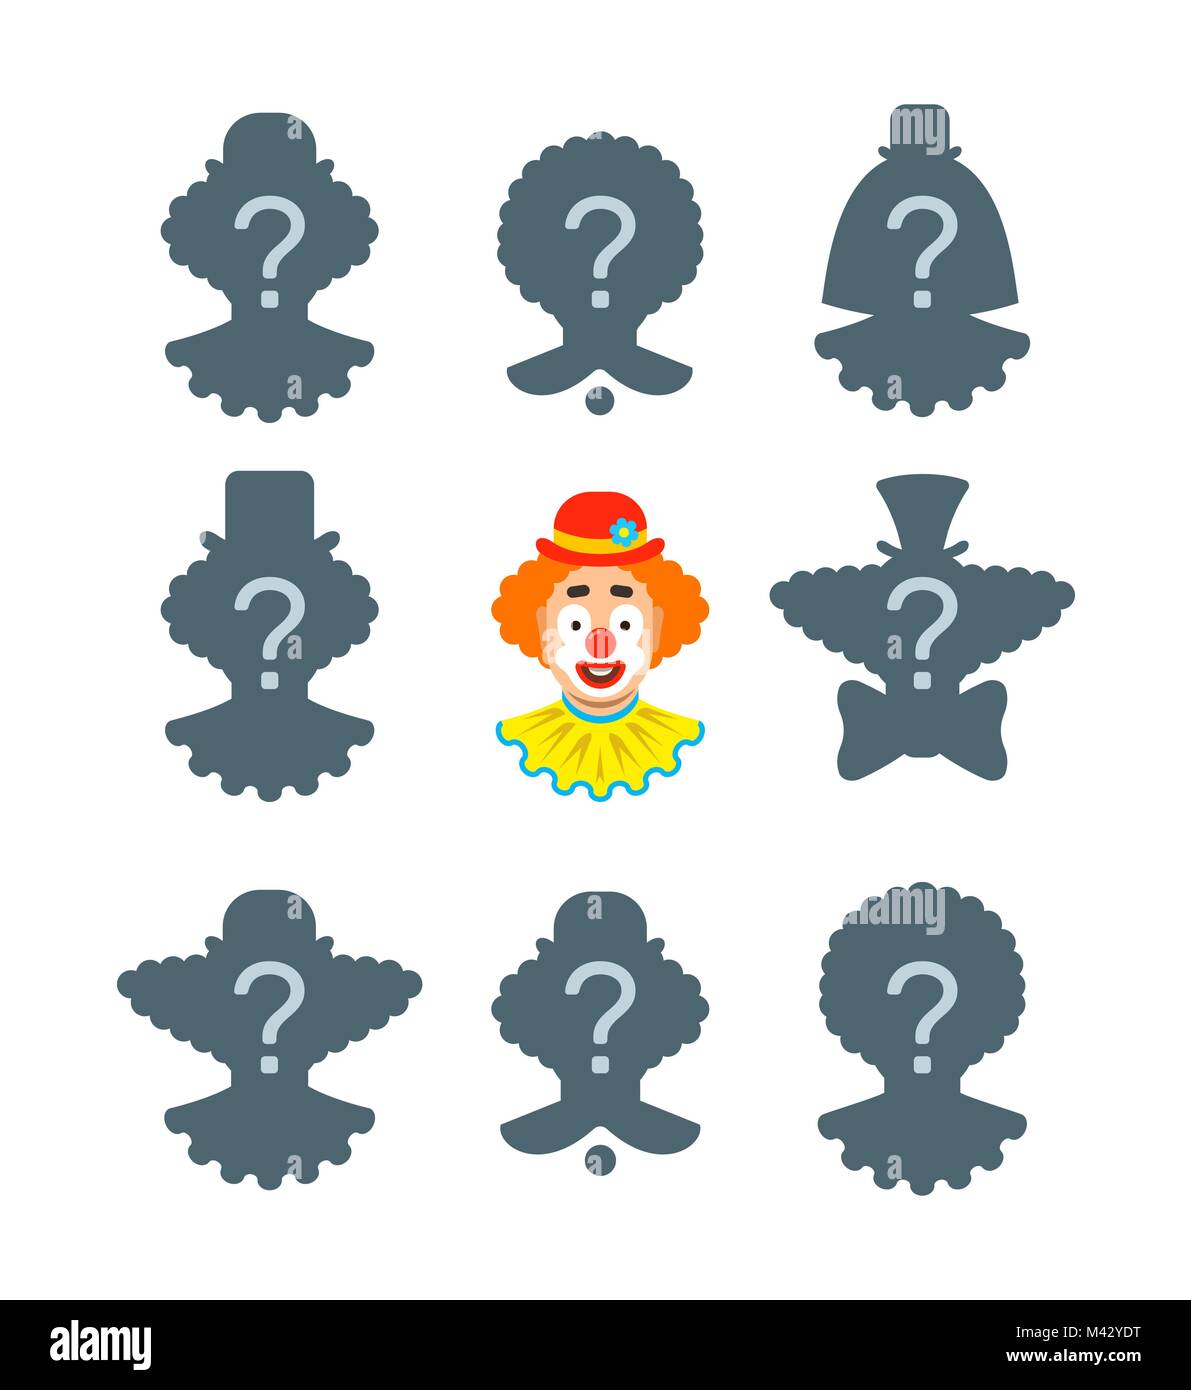 Find the shadow educational puzzle game. Match the correct silhouette of funny clown face. Visual test for preschool kids Stock Vector